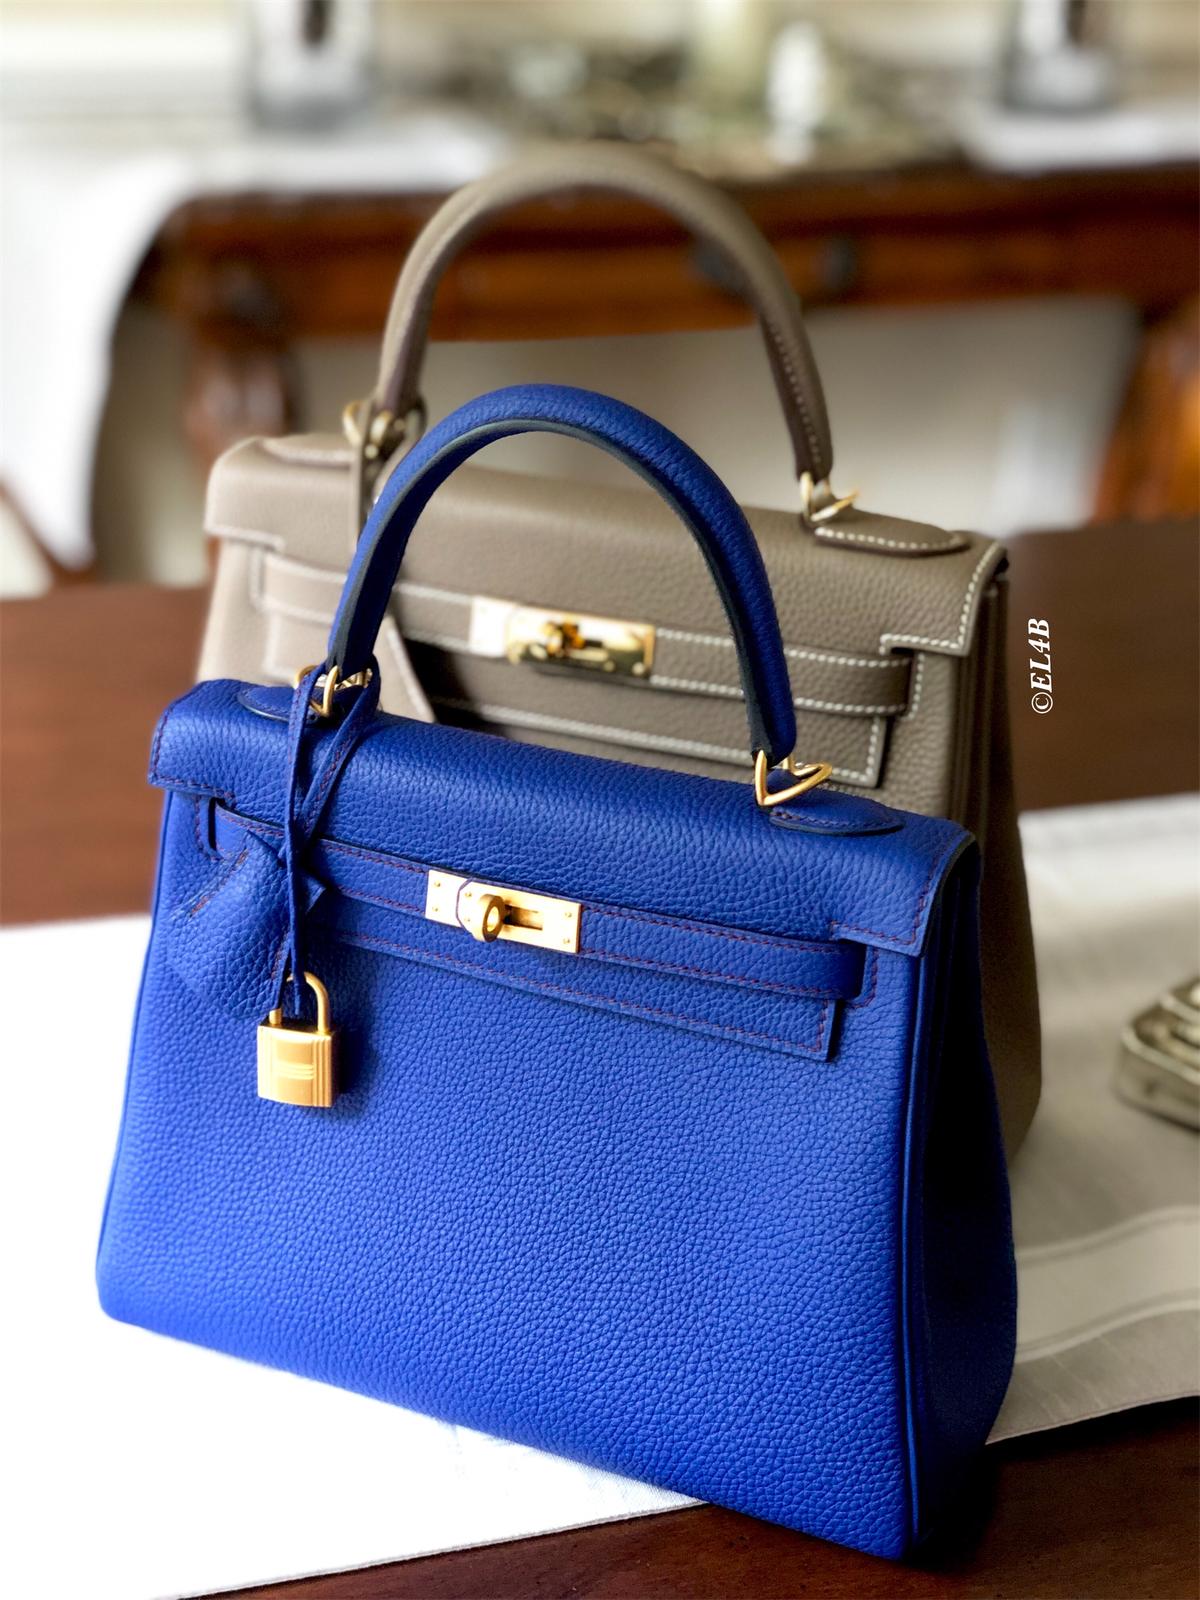 hermes kelly sizes and prices